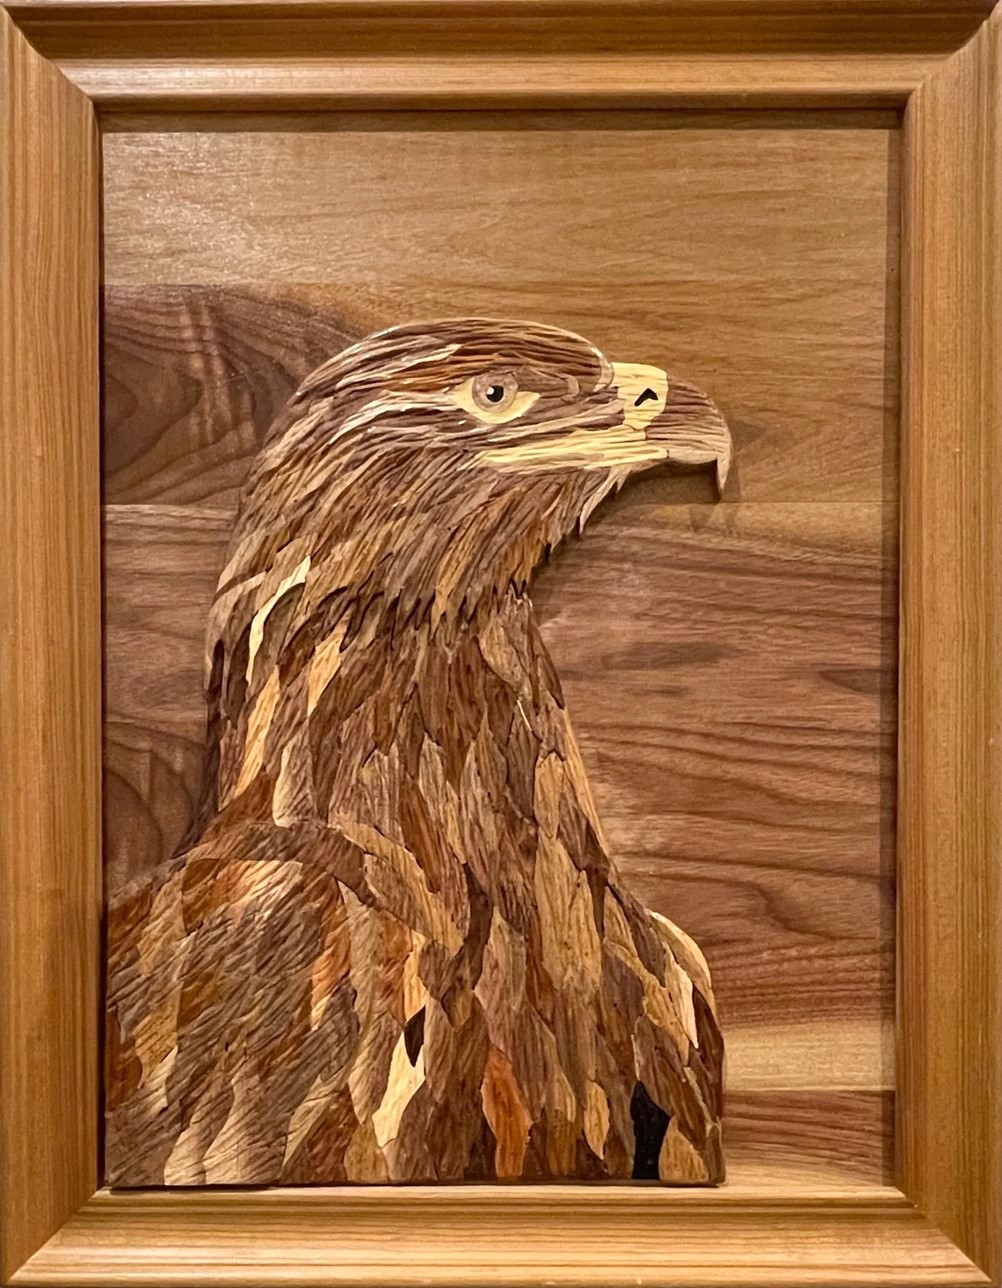 Wall Sculpture. Title: Kind Eagle, Walnut, Alder and Oakwood-16x12 inches Carved Wood Wall reliefs sculpture by Abbas Bahrami.